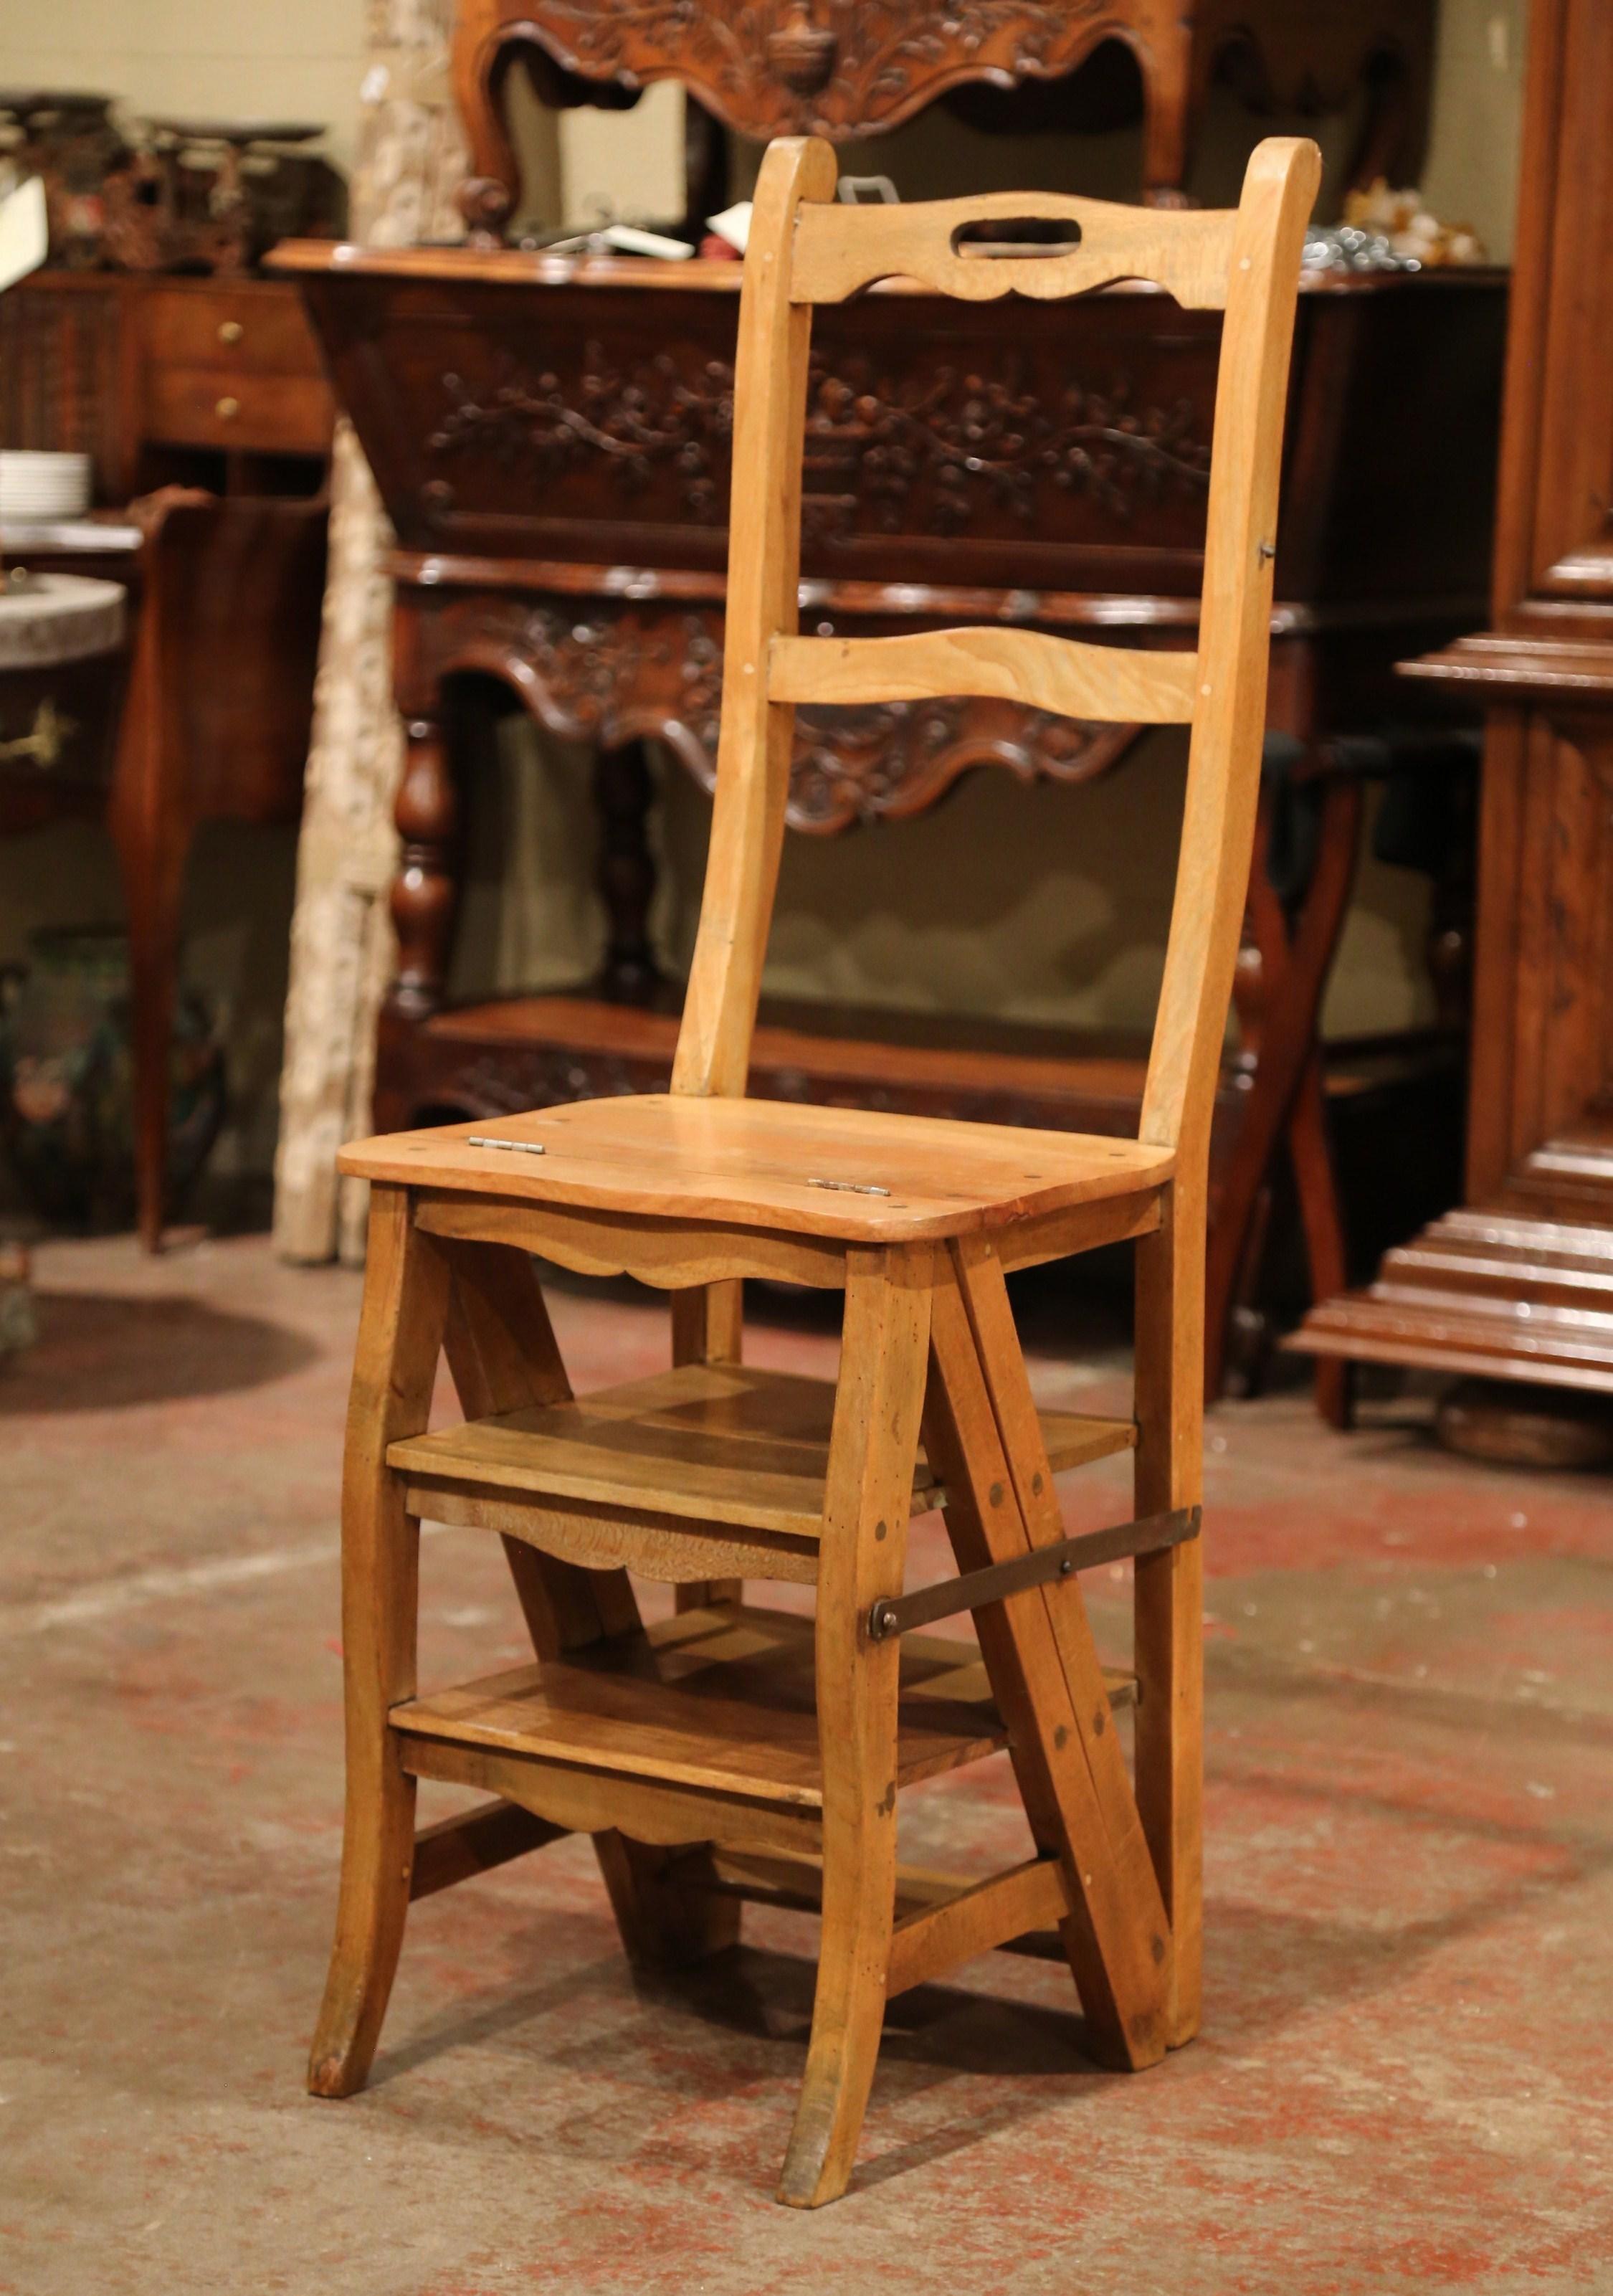 Decorate a library or study with this artisan-made folding step ladder chair. Crafted in Southern France circa 1900, the metamorphic chair has two carved ladders in the back and is hinged so that it can convert into a ladder with six stairs for a